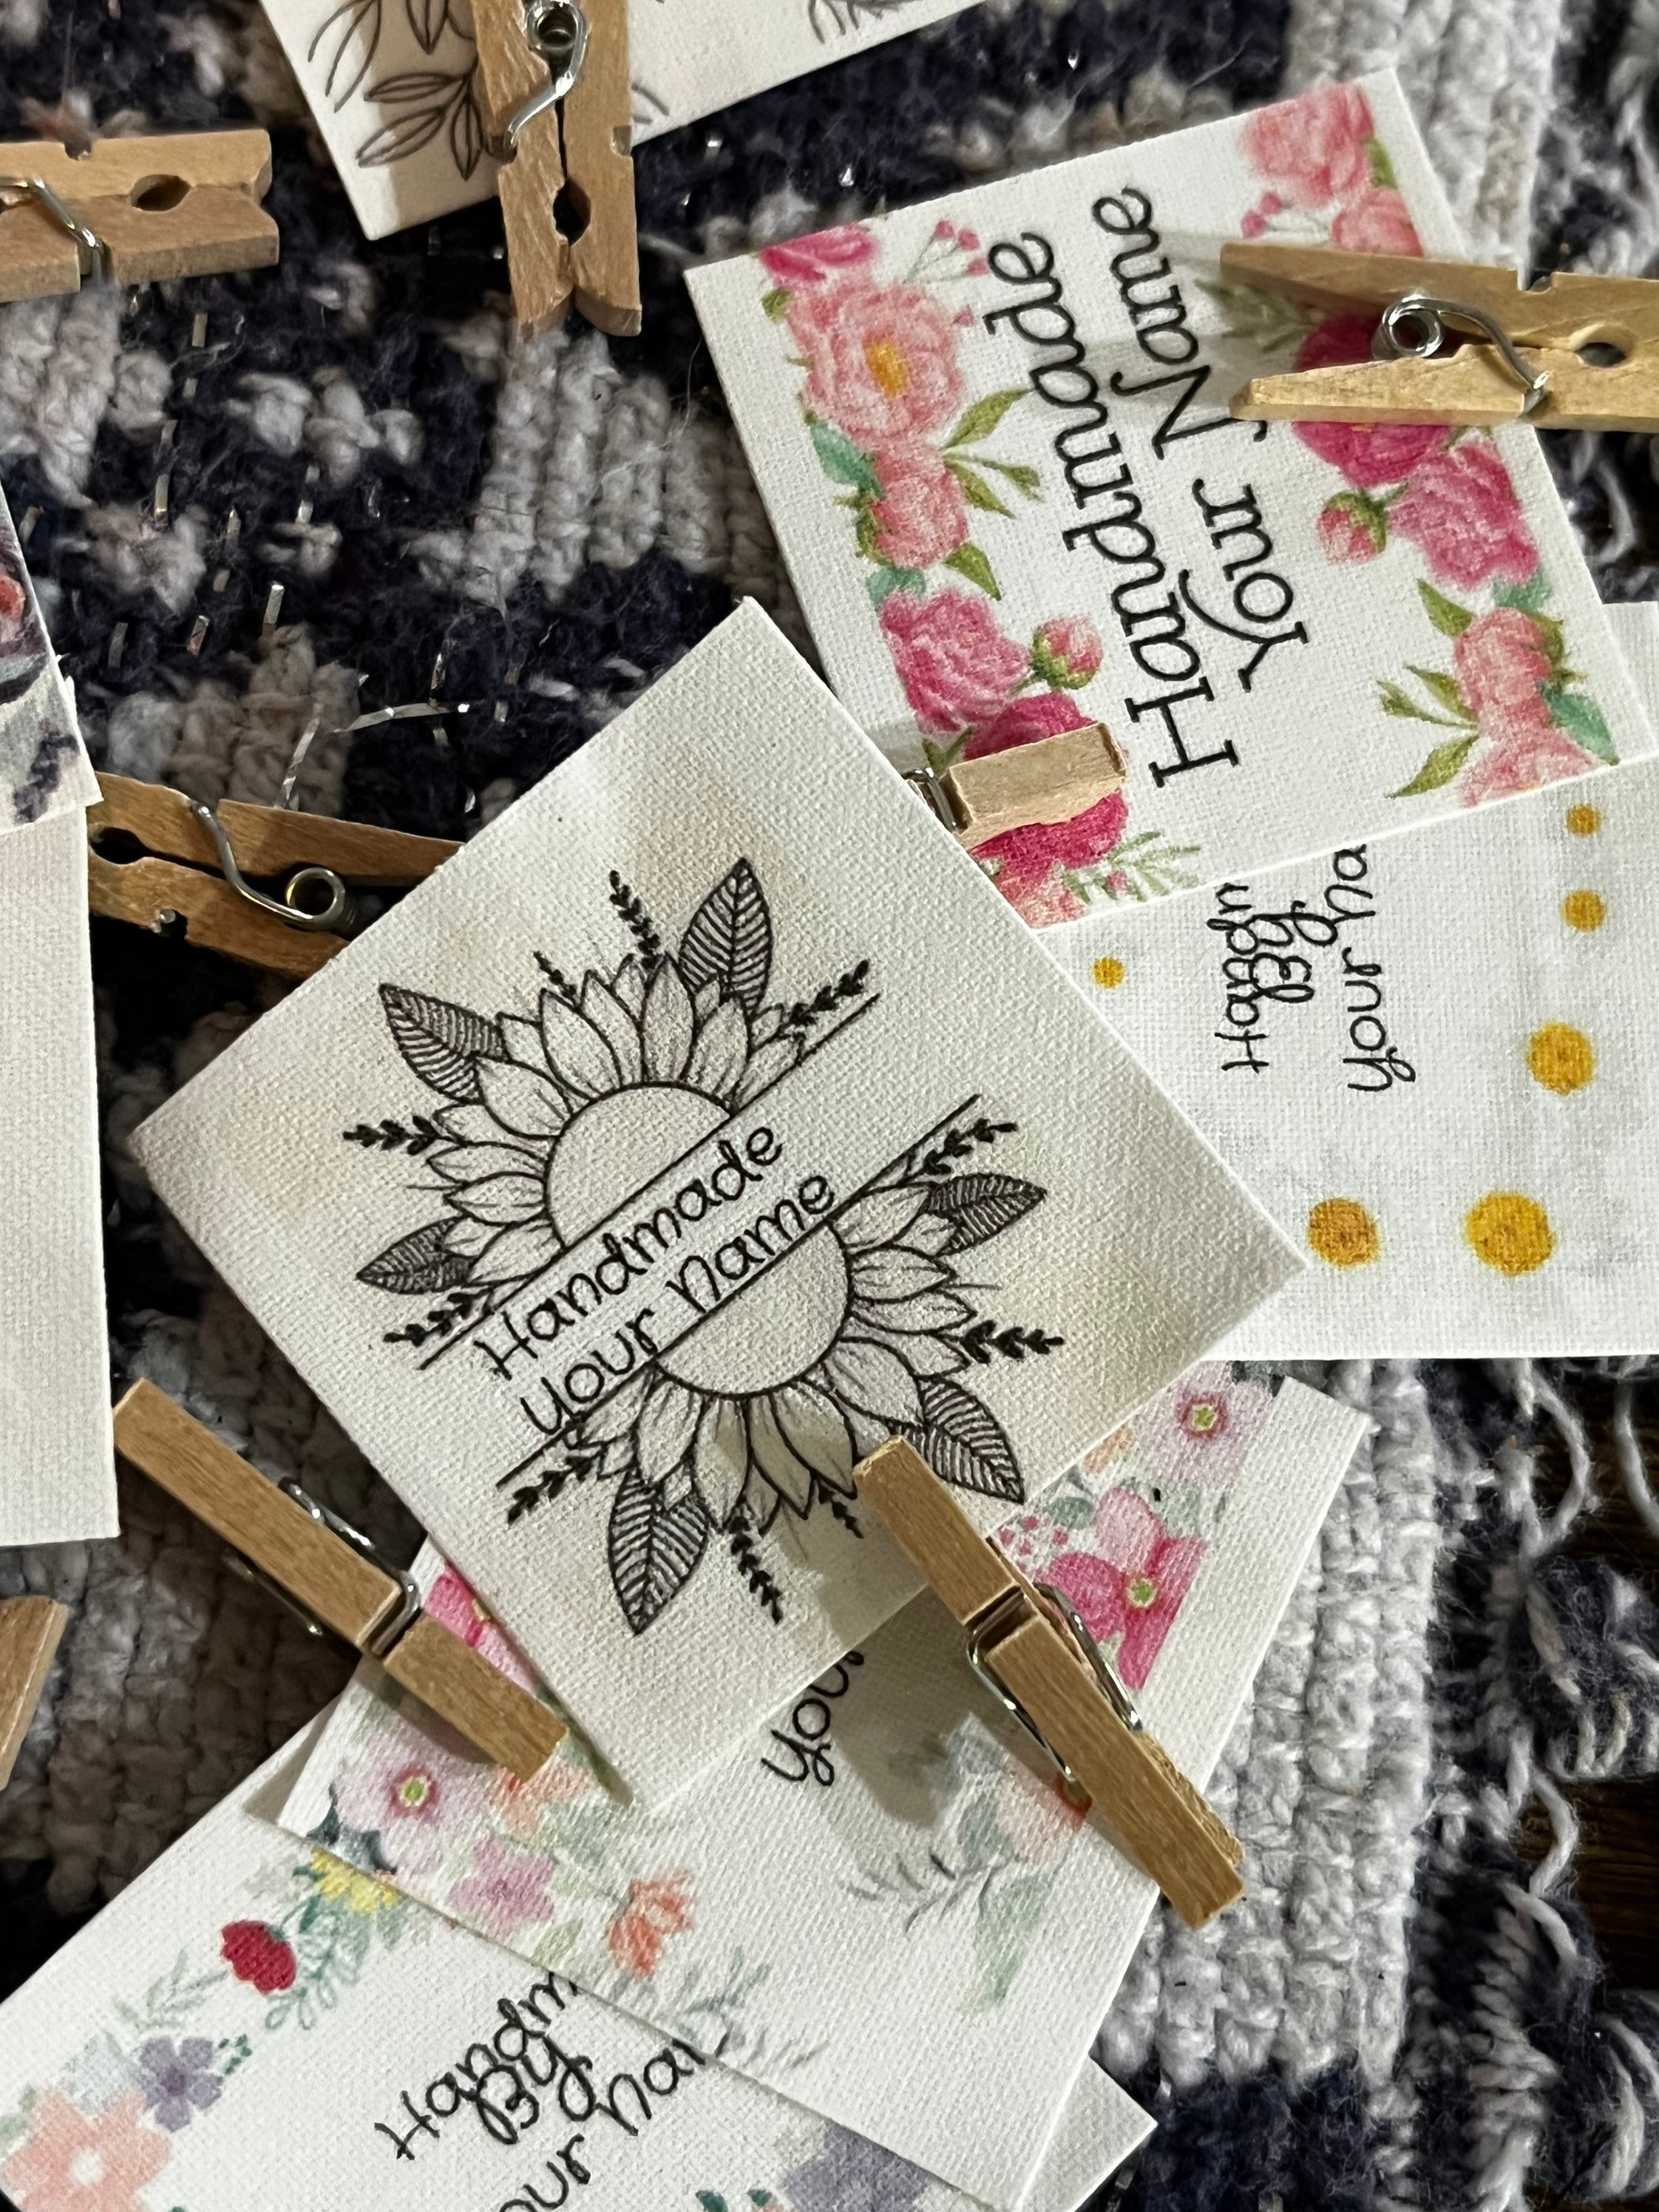  IMIKEYA 300 Pcs Love Woven Label Handmade Tags for Crochet  Garment Collar Label Crafting Fabric Tags Love Sewing Labels Handmade  Fabric Labels Garment Labels Clothing Woven Cloth Cotton : Home 